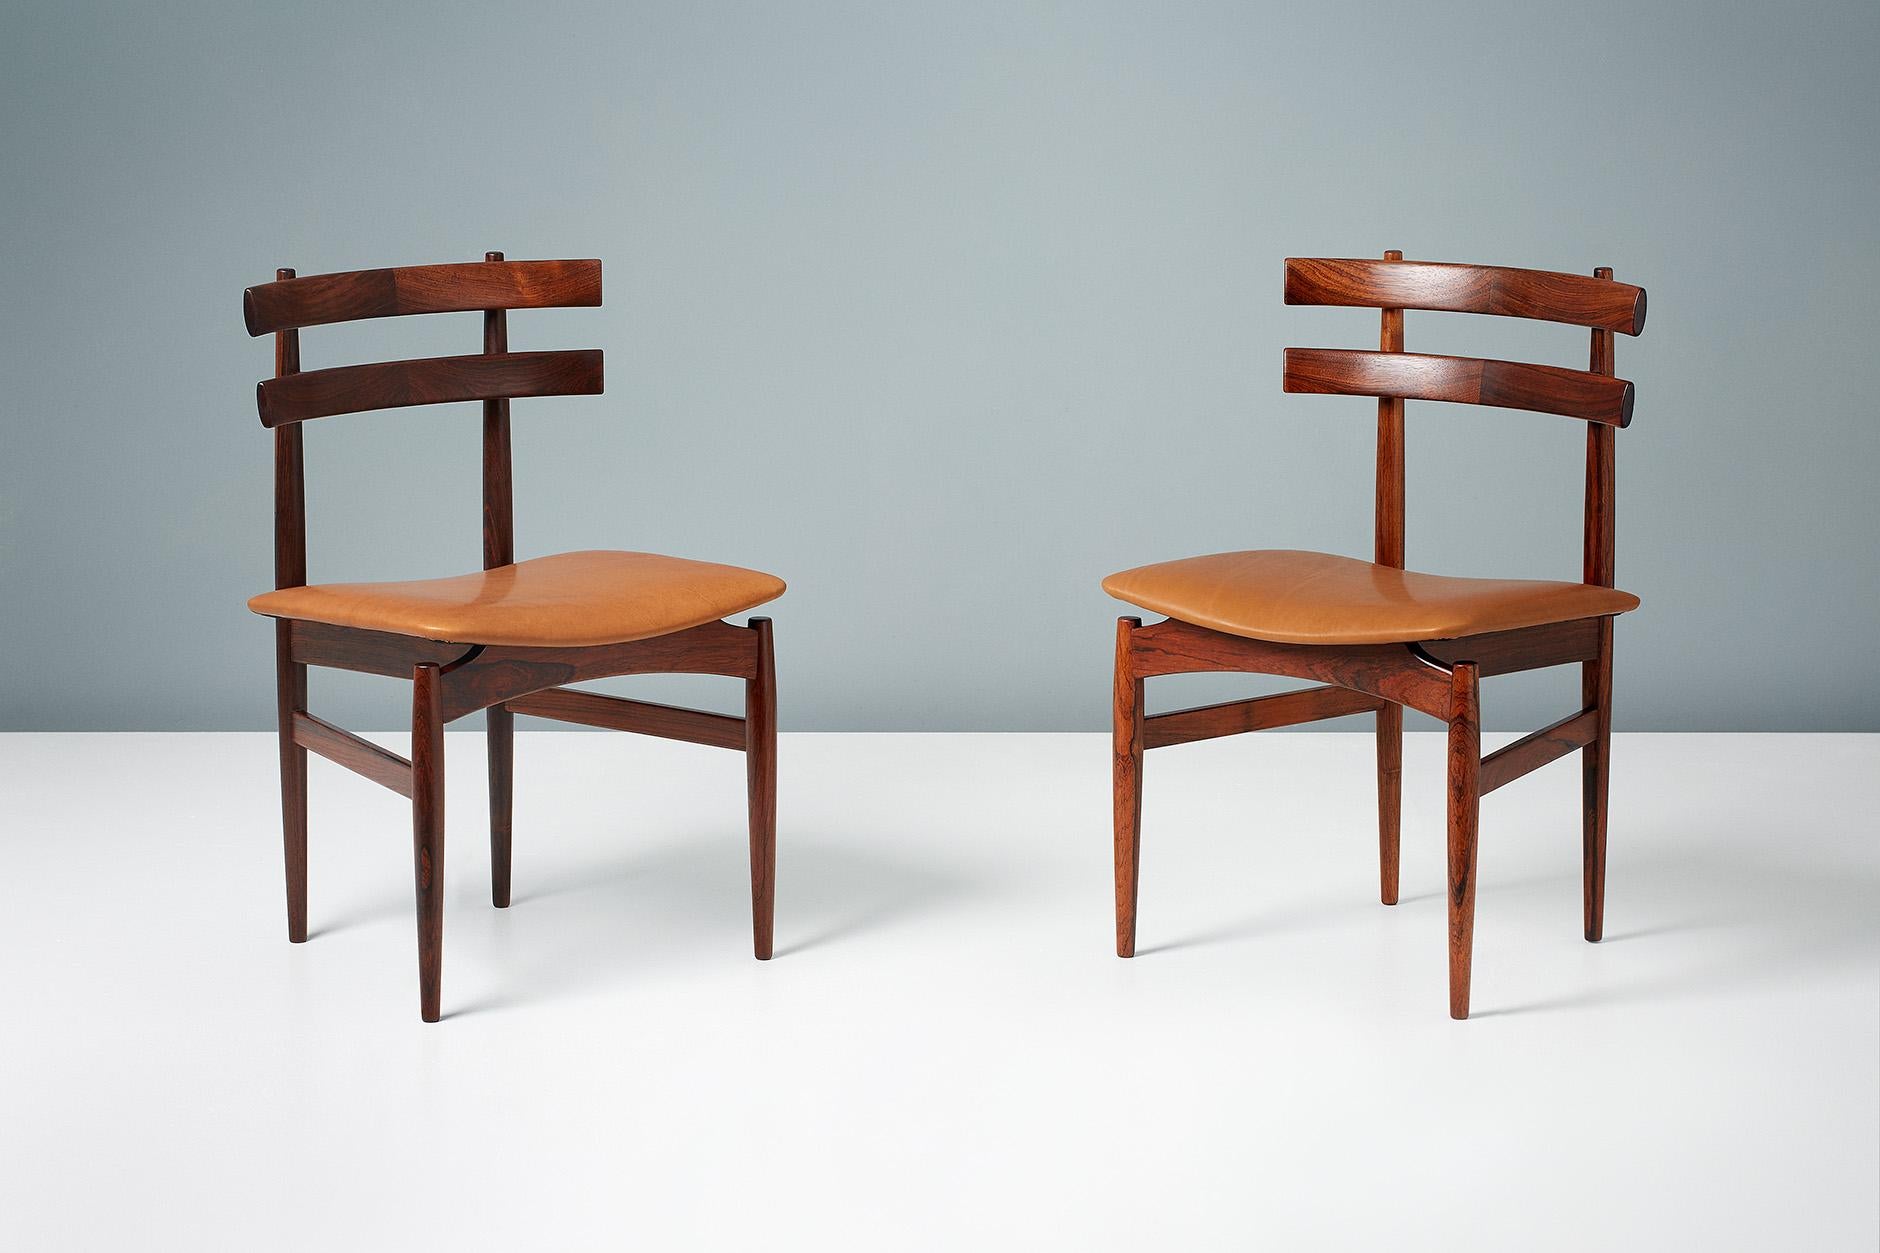 Rarely seen set of six sculptural Brazilian rosewood dining chairs by Poul Hundevad. The seats have been newly upholstered in aniline cognac brown leather. Manufactured by Poul Hundevad in Vamdrup, Denmark, circa 1958. 

 